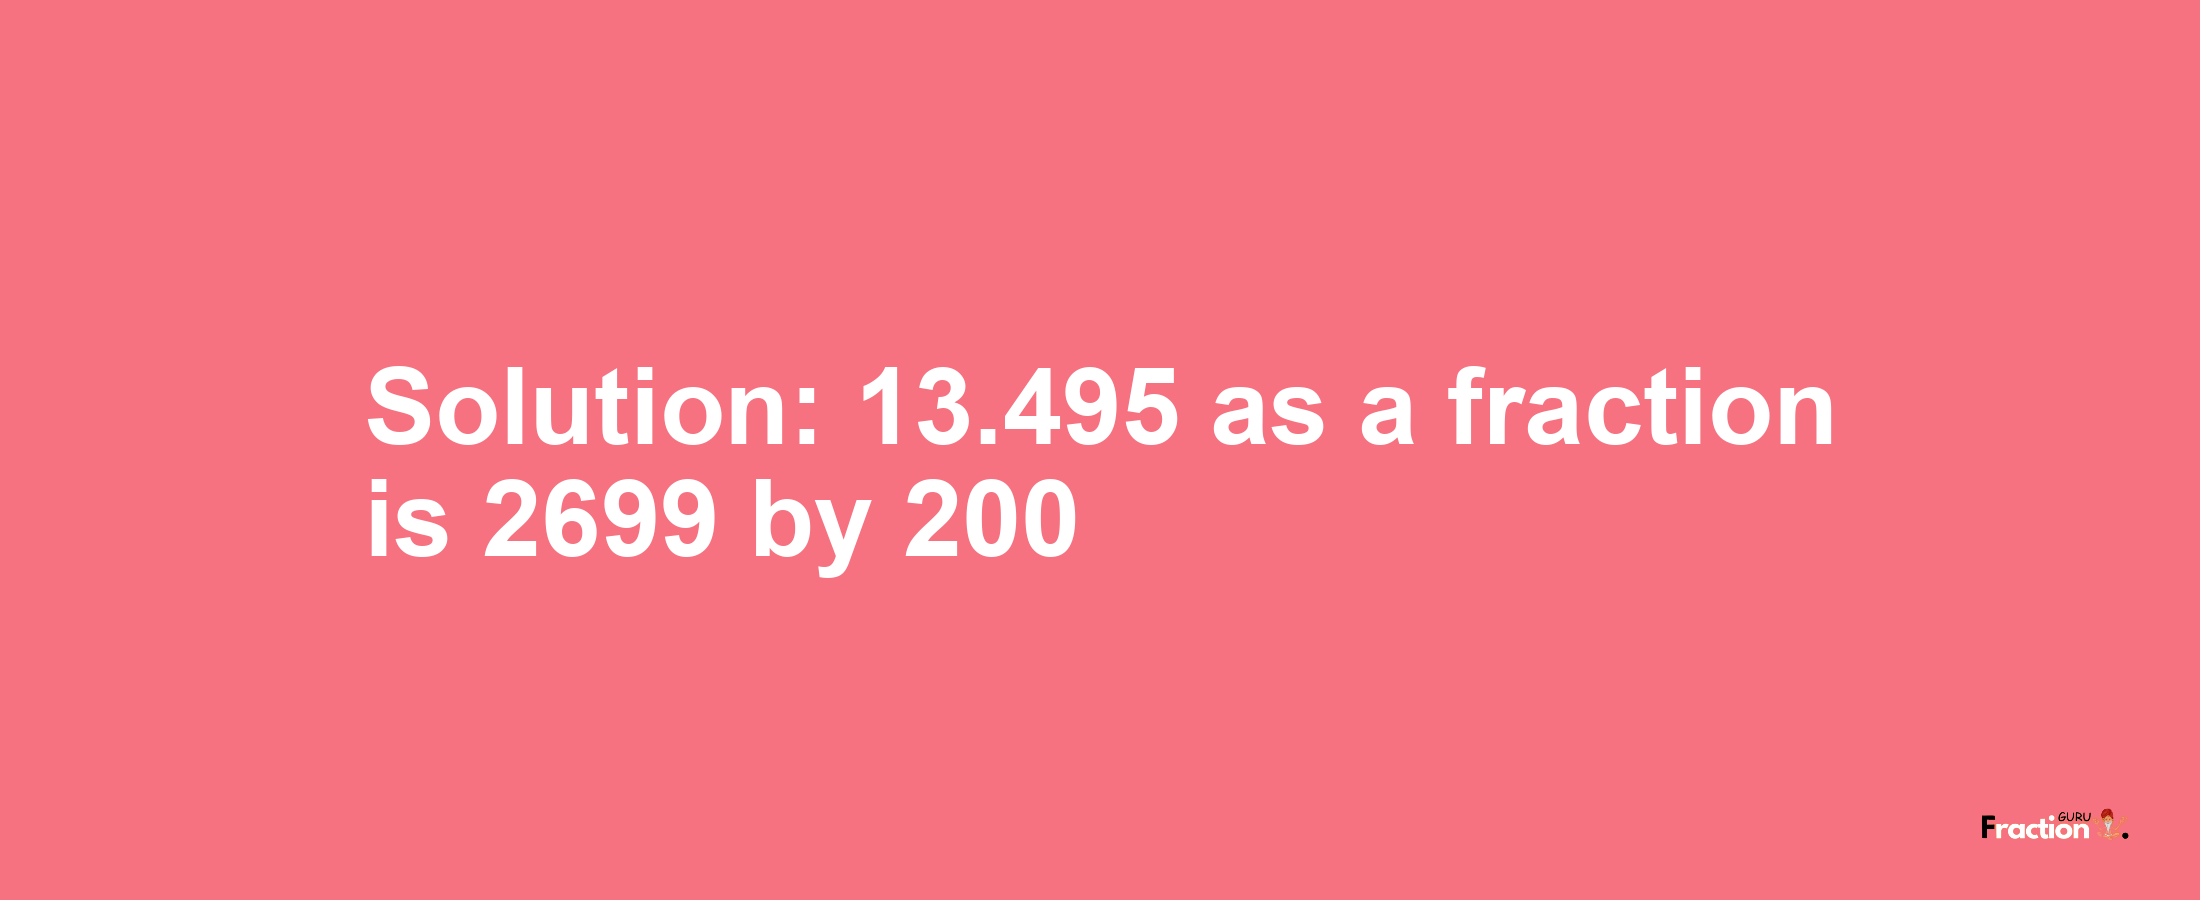 Solution:13.495 as a fraction is 2699/200